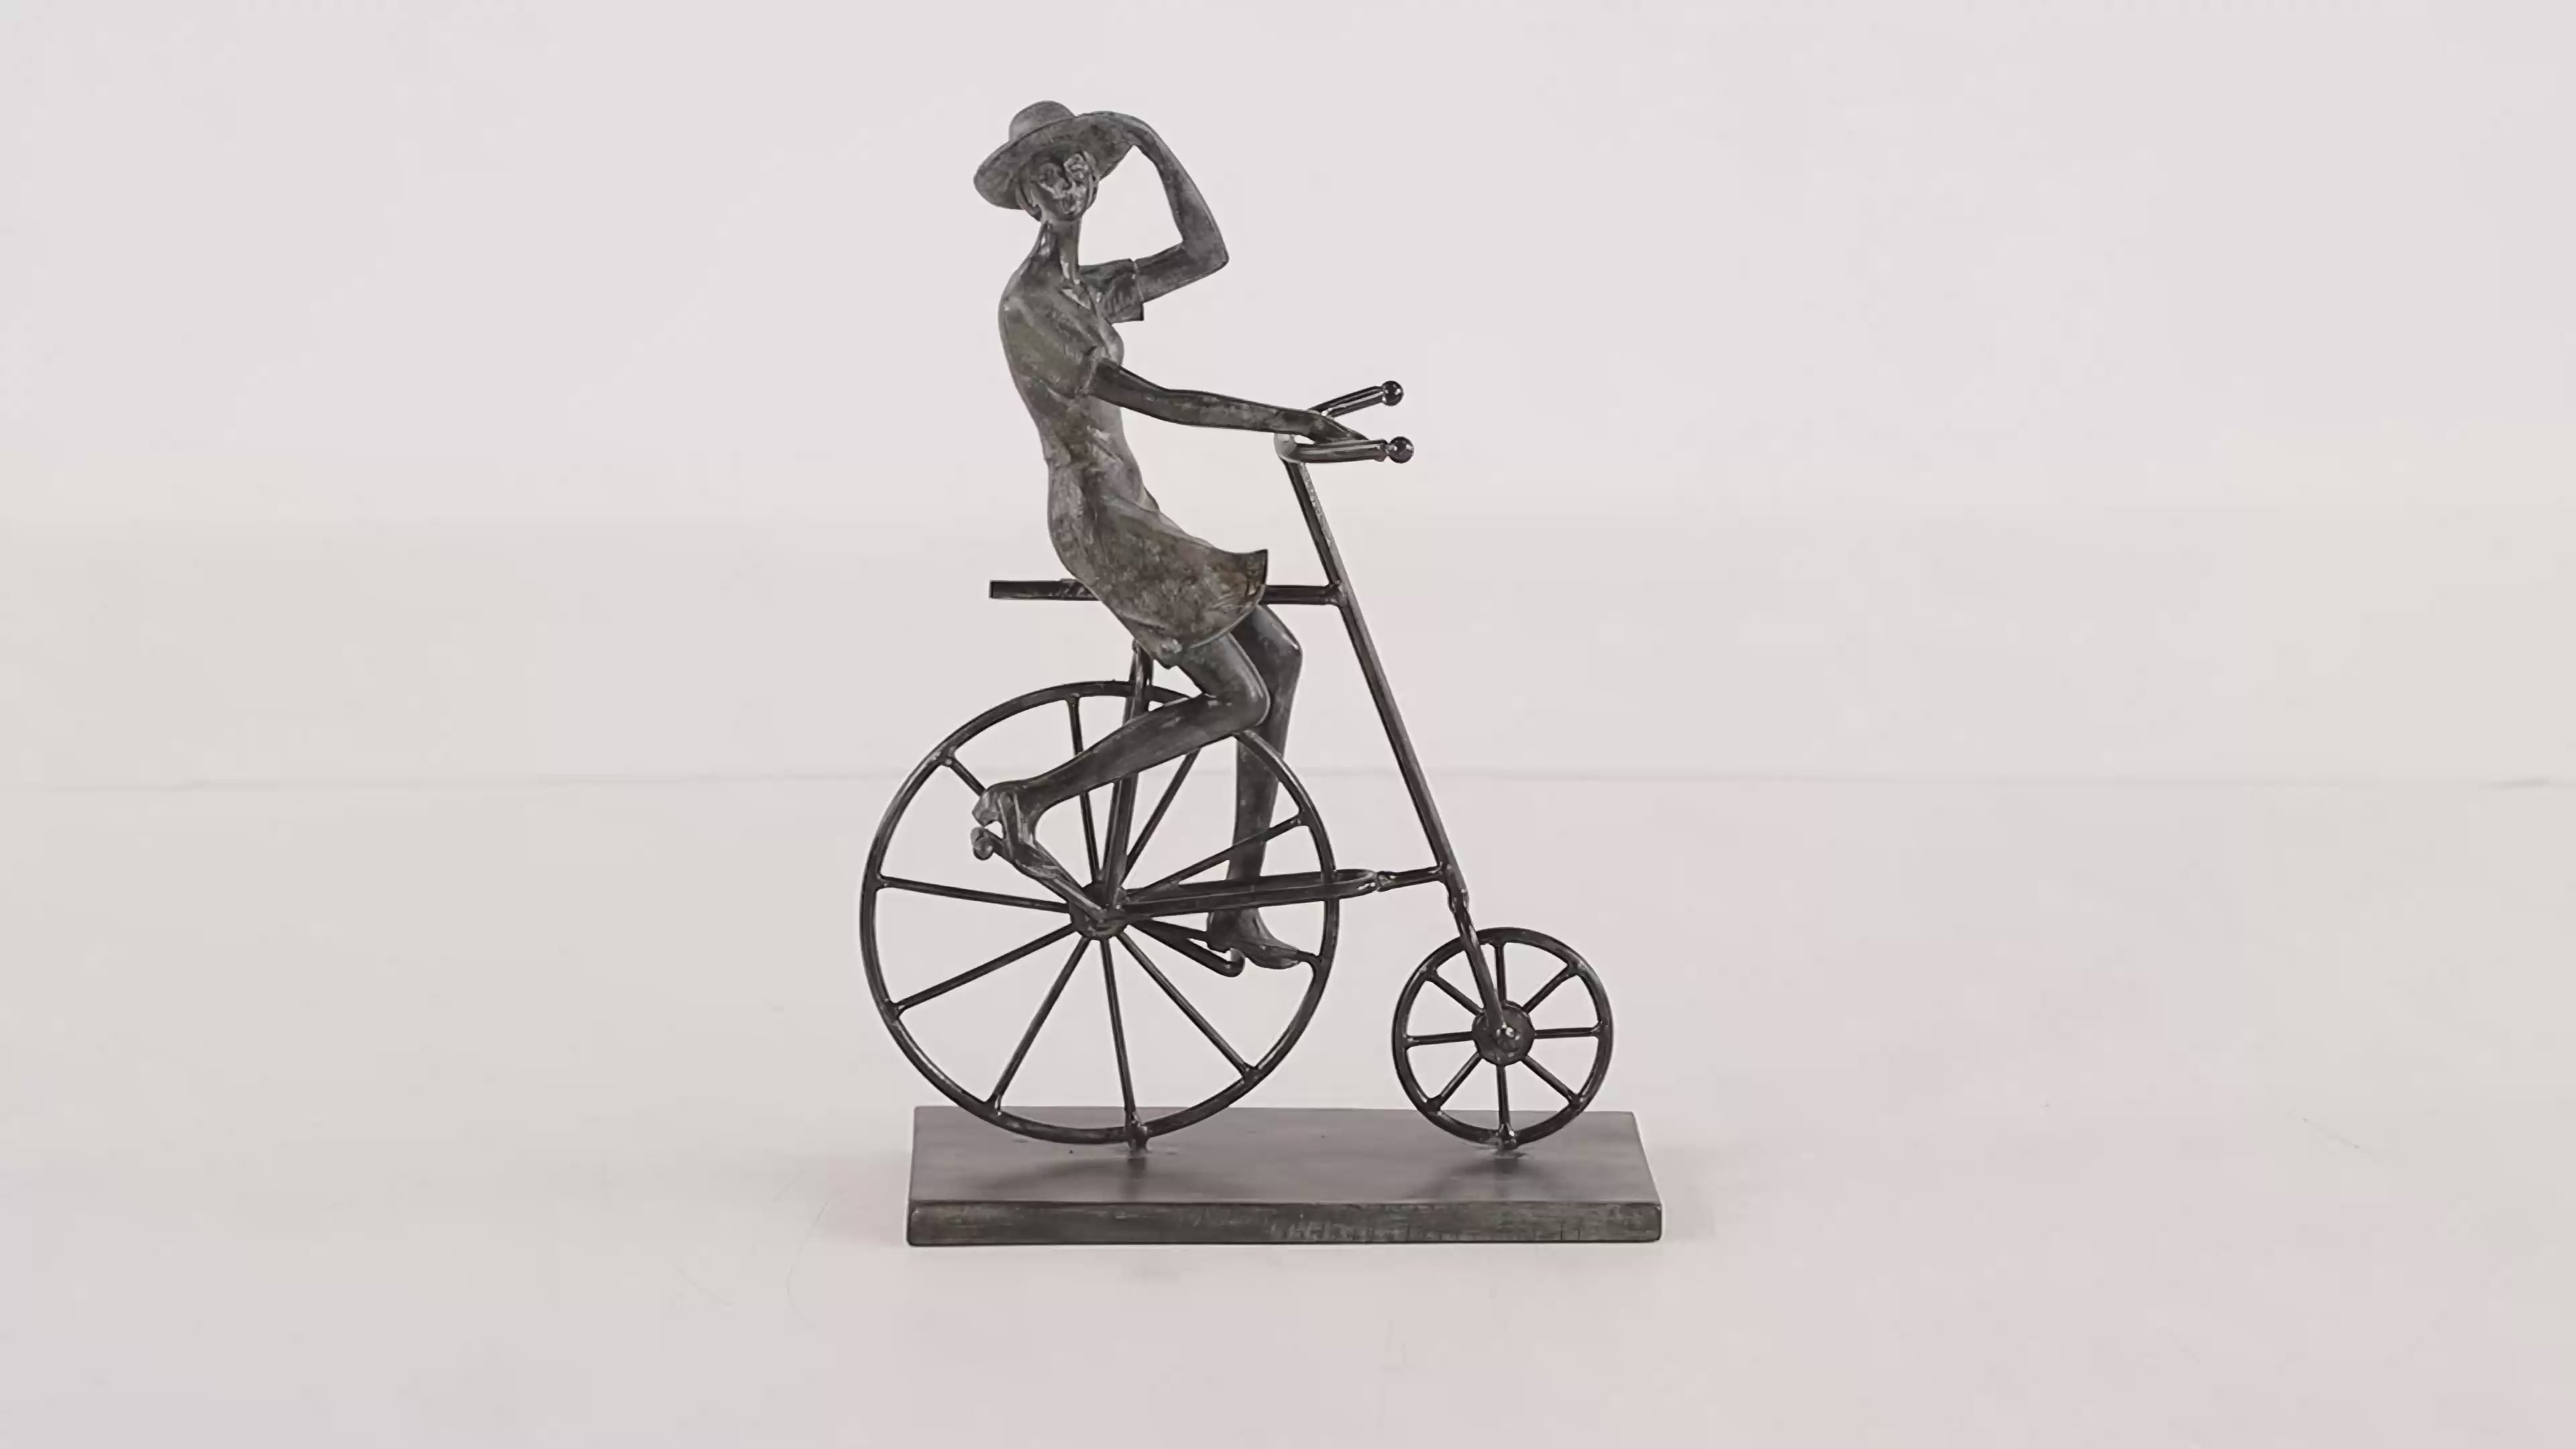 Sculpture that features a cyclist on a penny-farthing-inspired bicycle balanced securely on a flat platform base. Figurine is in grey color and is spinning in 360 degrees. Background is all white